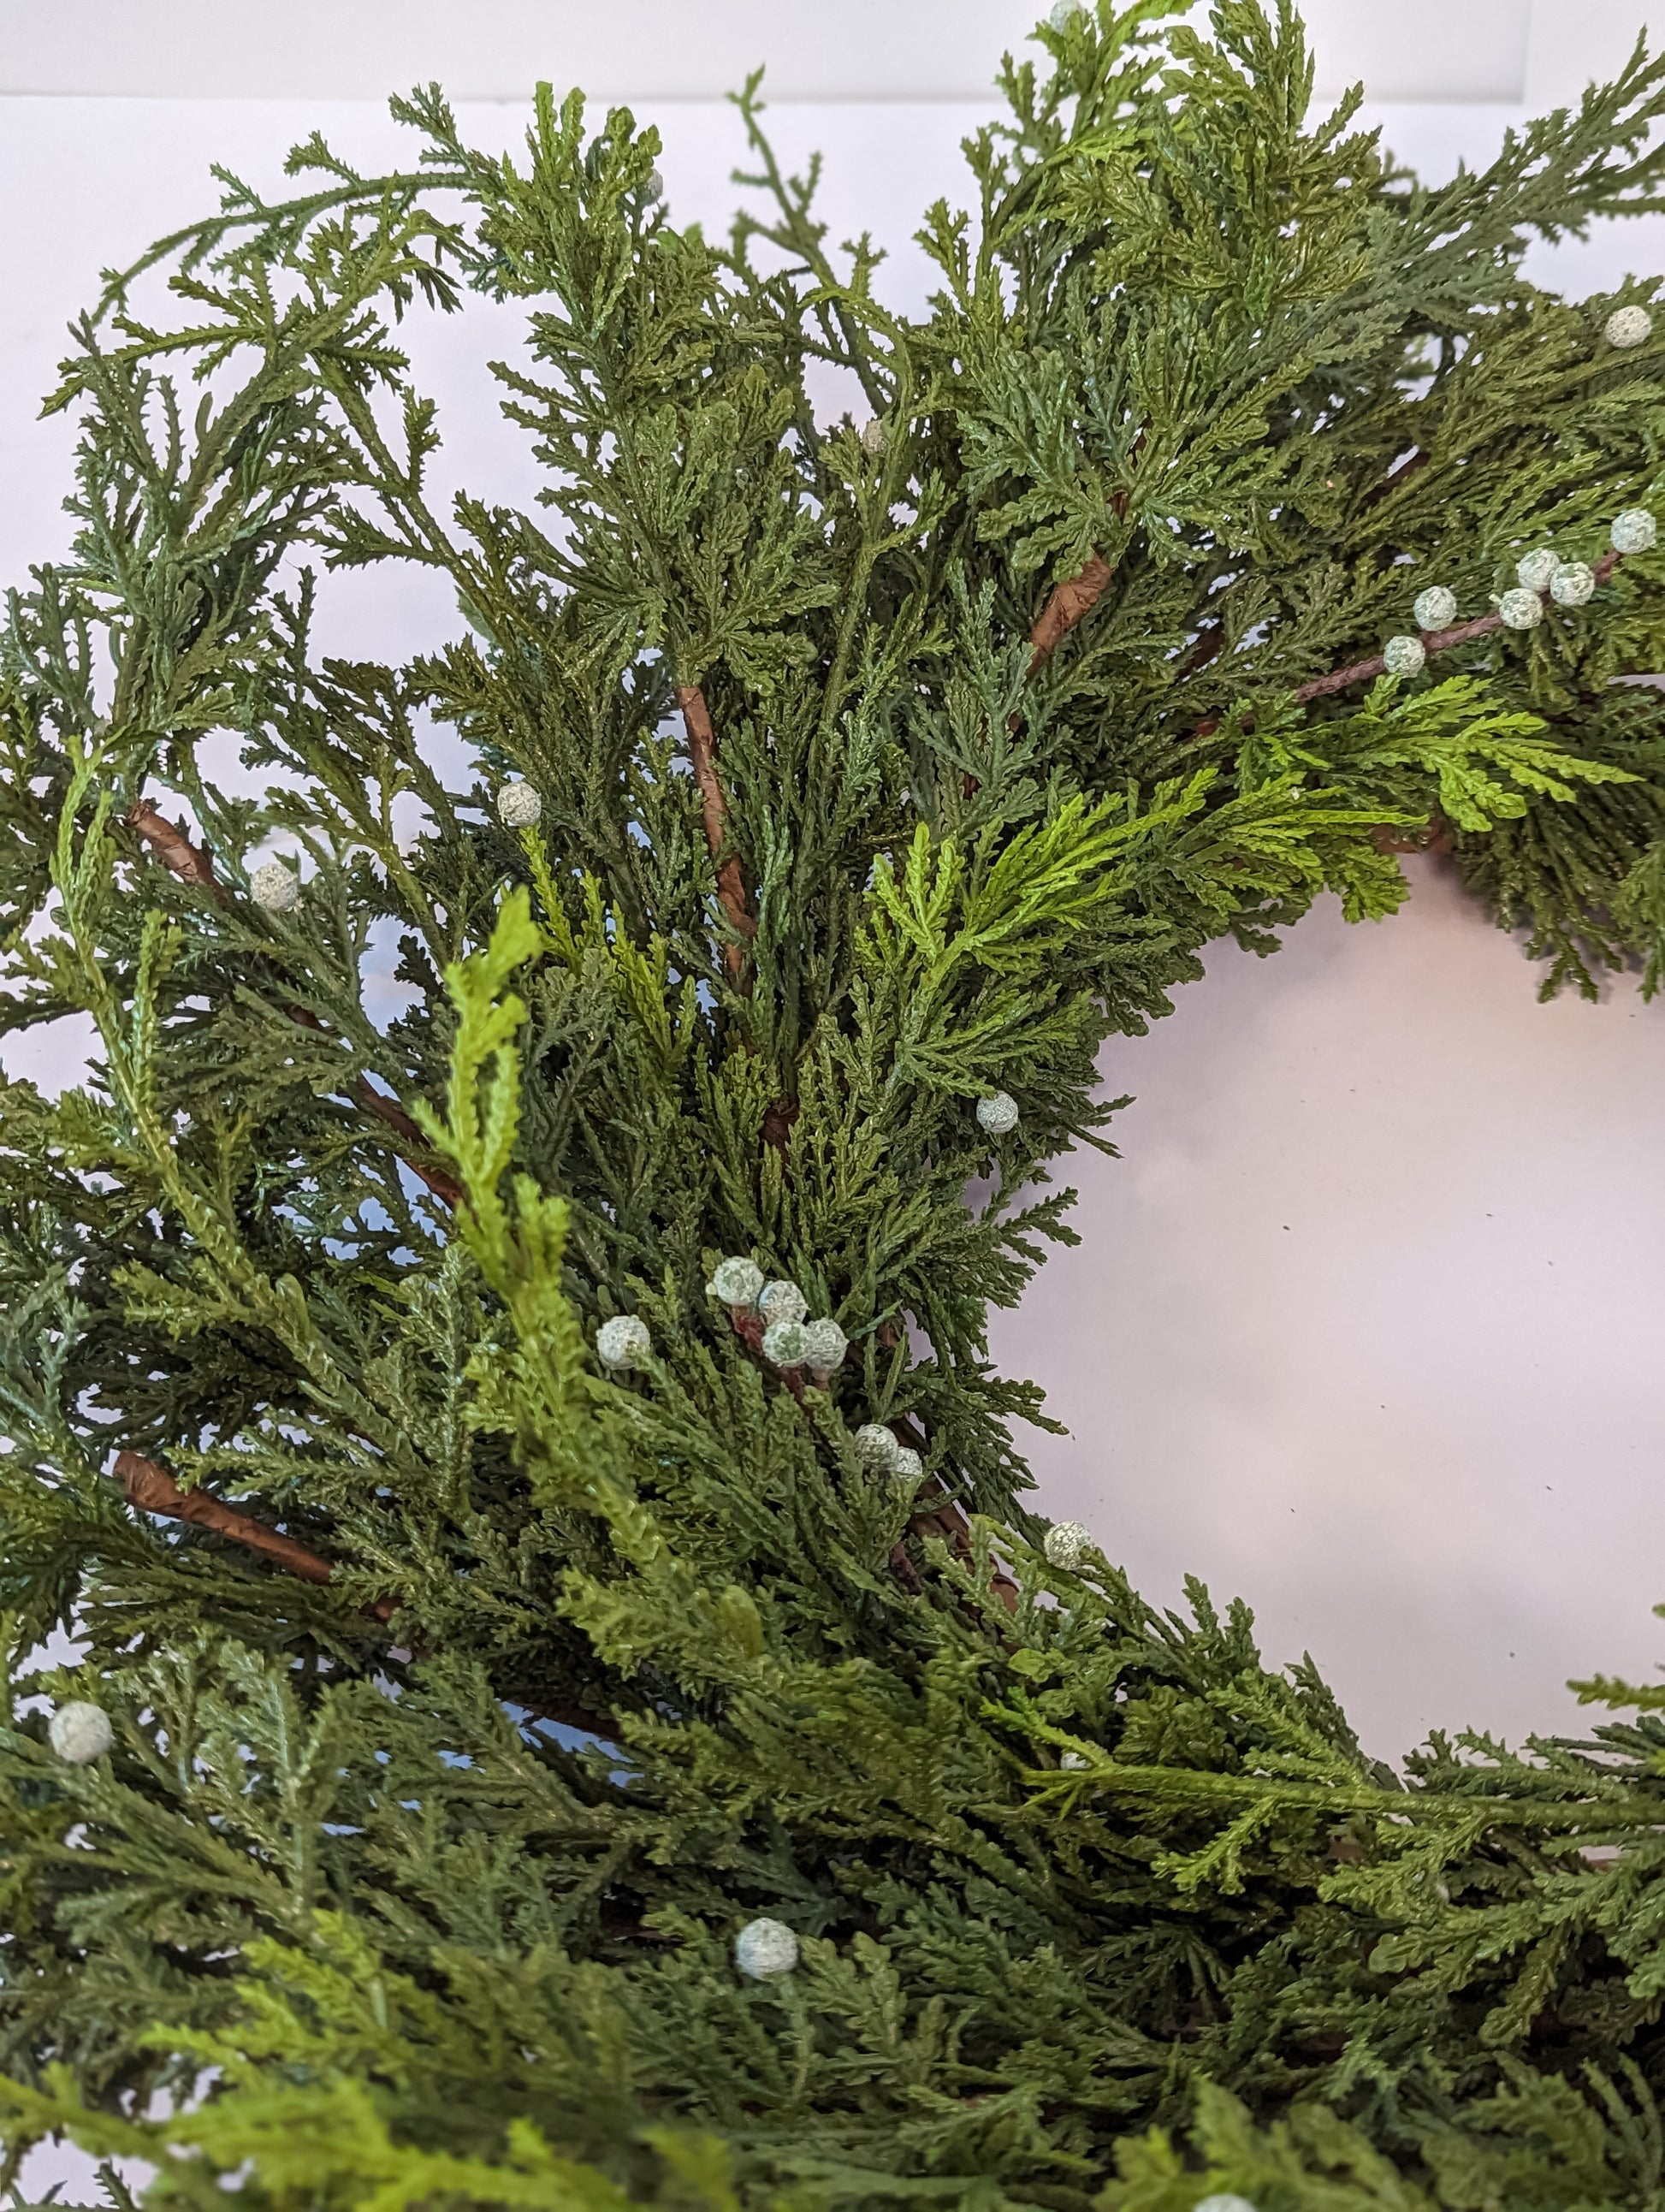 Up close picture for product feature of cypress berry wreath showcasing gradient of dark to lighter green and greenish-white berries for realistic looking artificial holiday front porch or back porch decor.